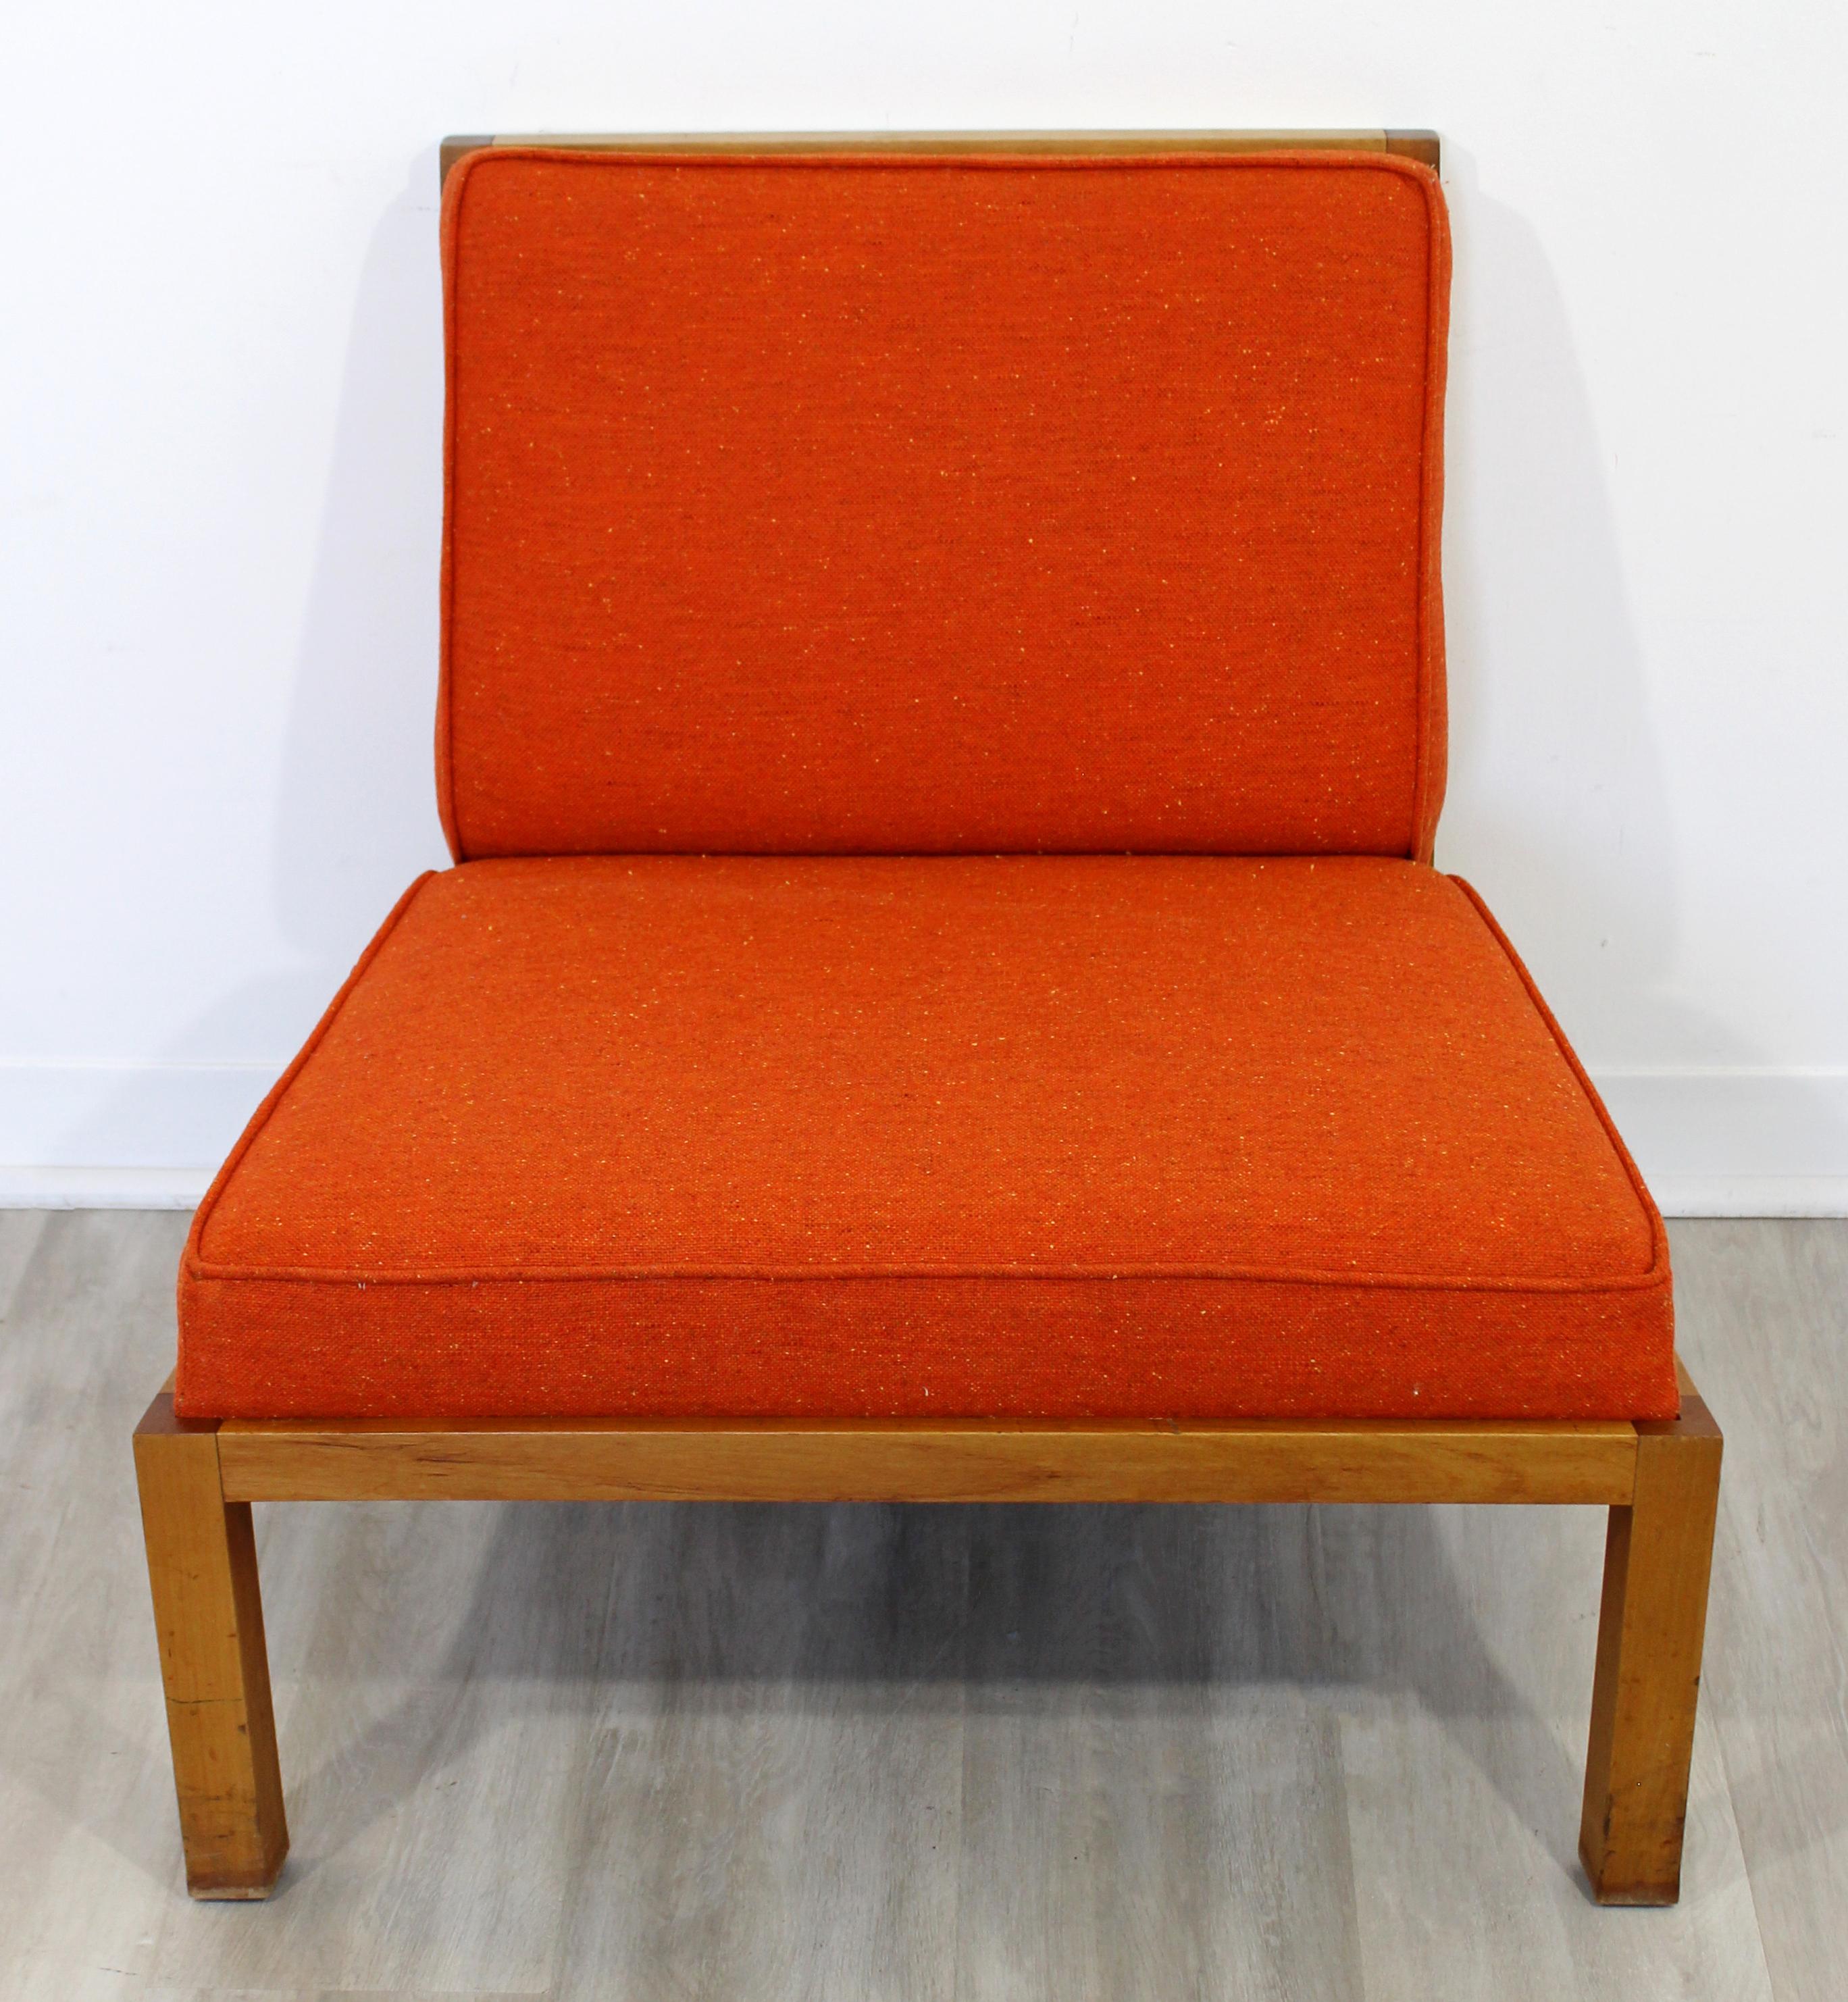 Mid-Century Modern Baker Wood Slat Back Side Lounge Accent Chair 1960s Orange In Good Condition In Keego Harbor, MI